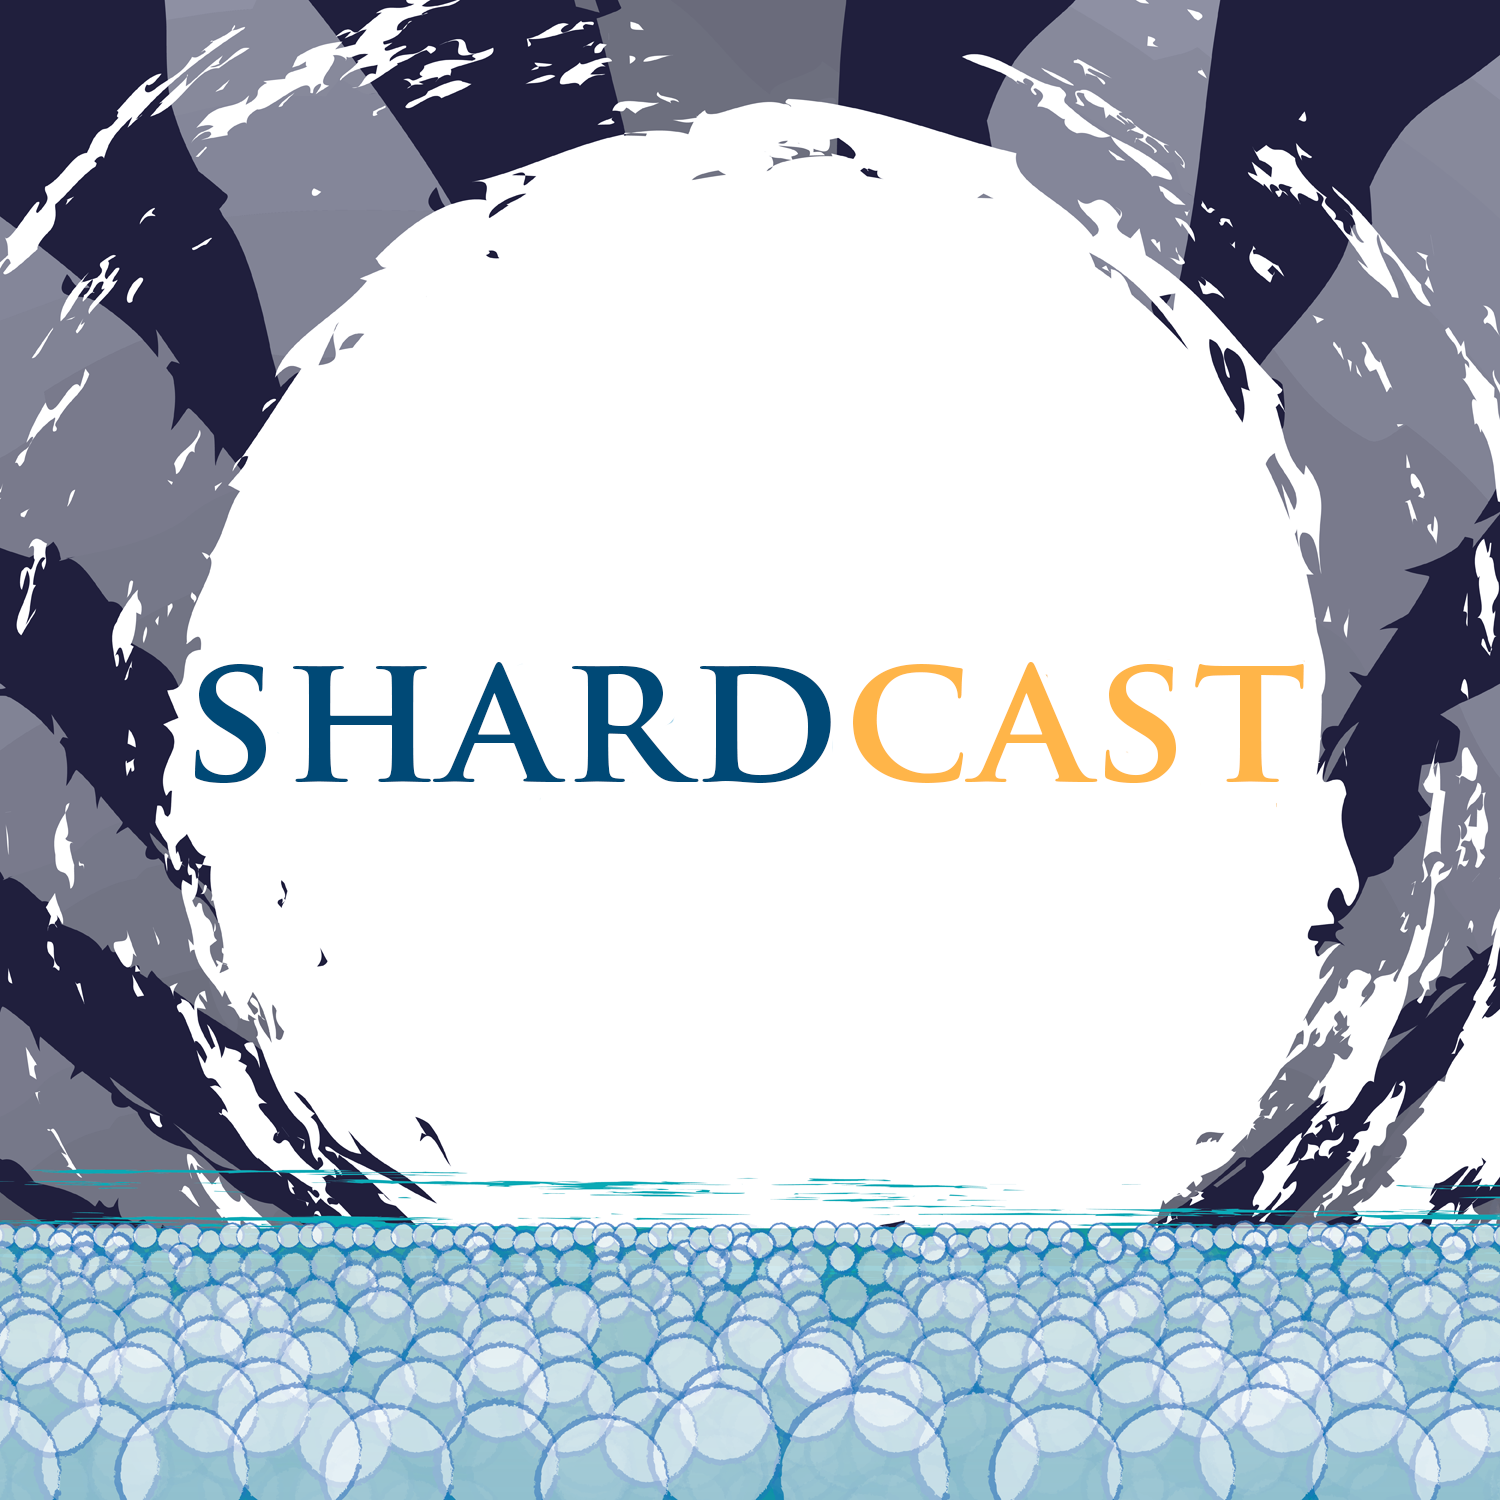 More information about "Shardcast: Janci Patterson on Bastille and Cytoverse"